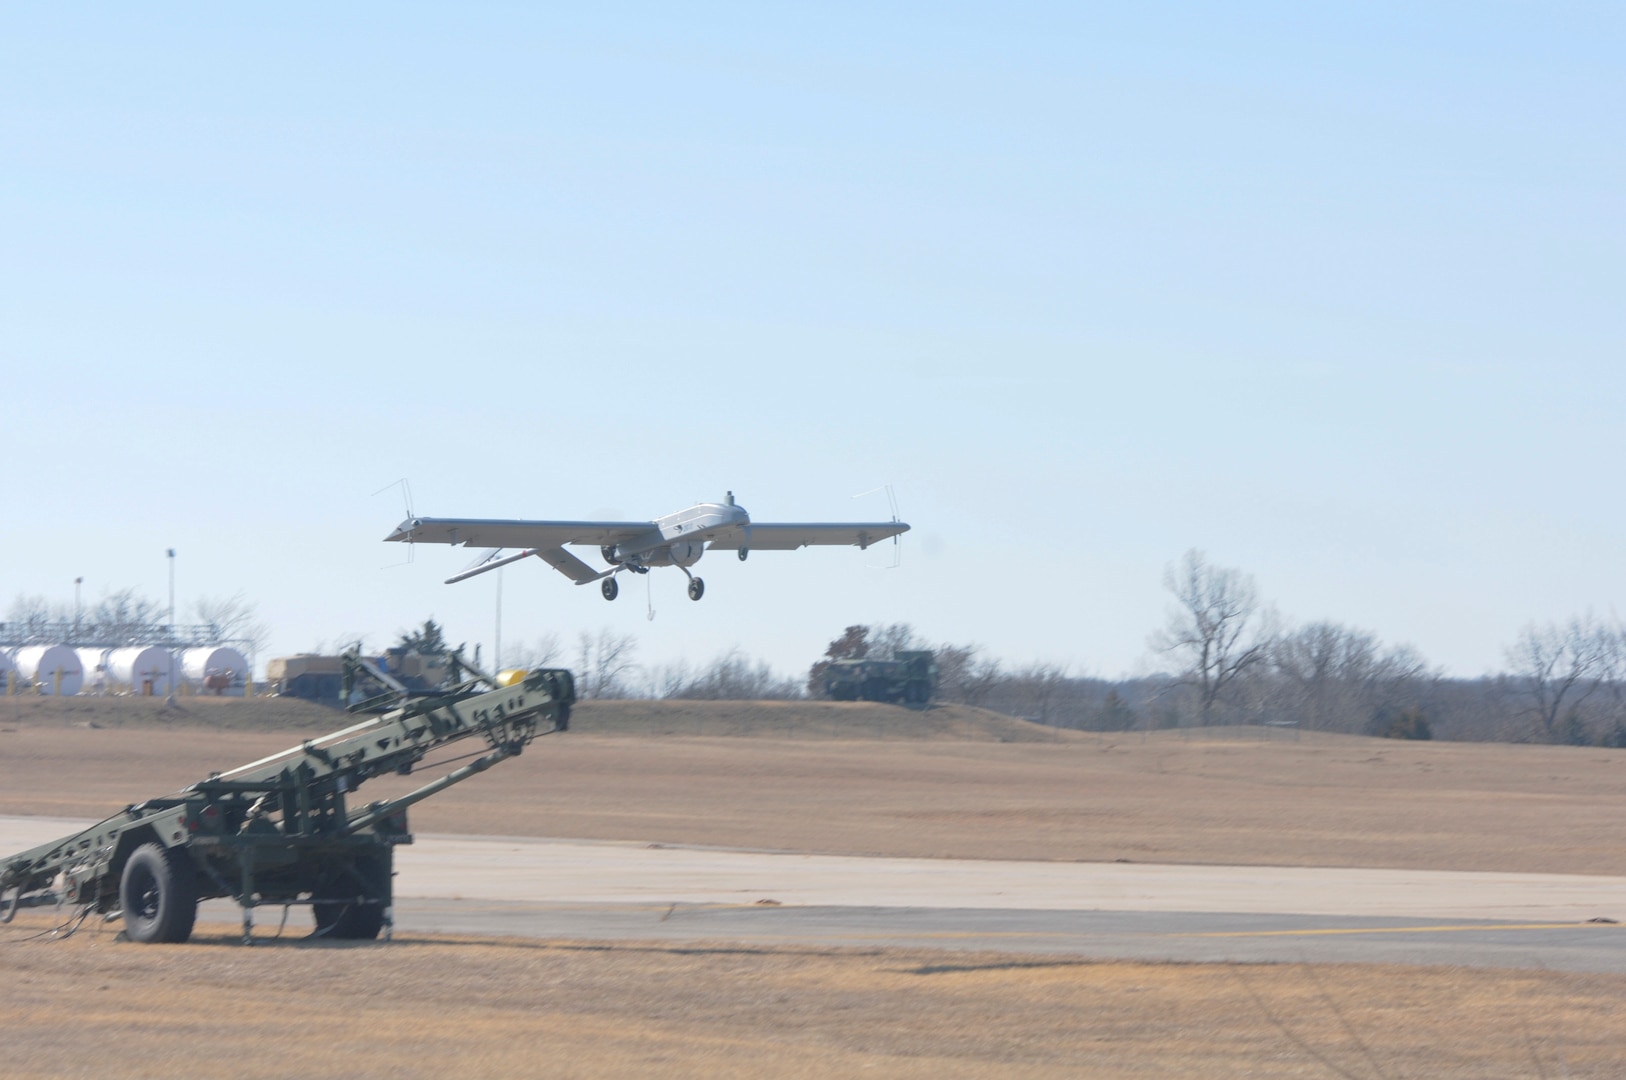 Oklahoma Army National Guard soldiers conduct their required Additional Flight Training Period (ATFP) hours with the RQ-7 Bravo or "Shadow" at Muldrow Army Heliport in Lexington, Oklahoma, Jan. 29, 2018. . (USANG photo by Staff Sgt. Jason Lay)